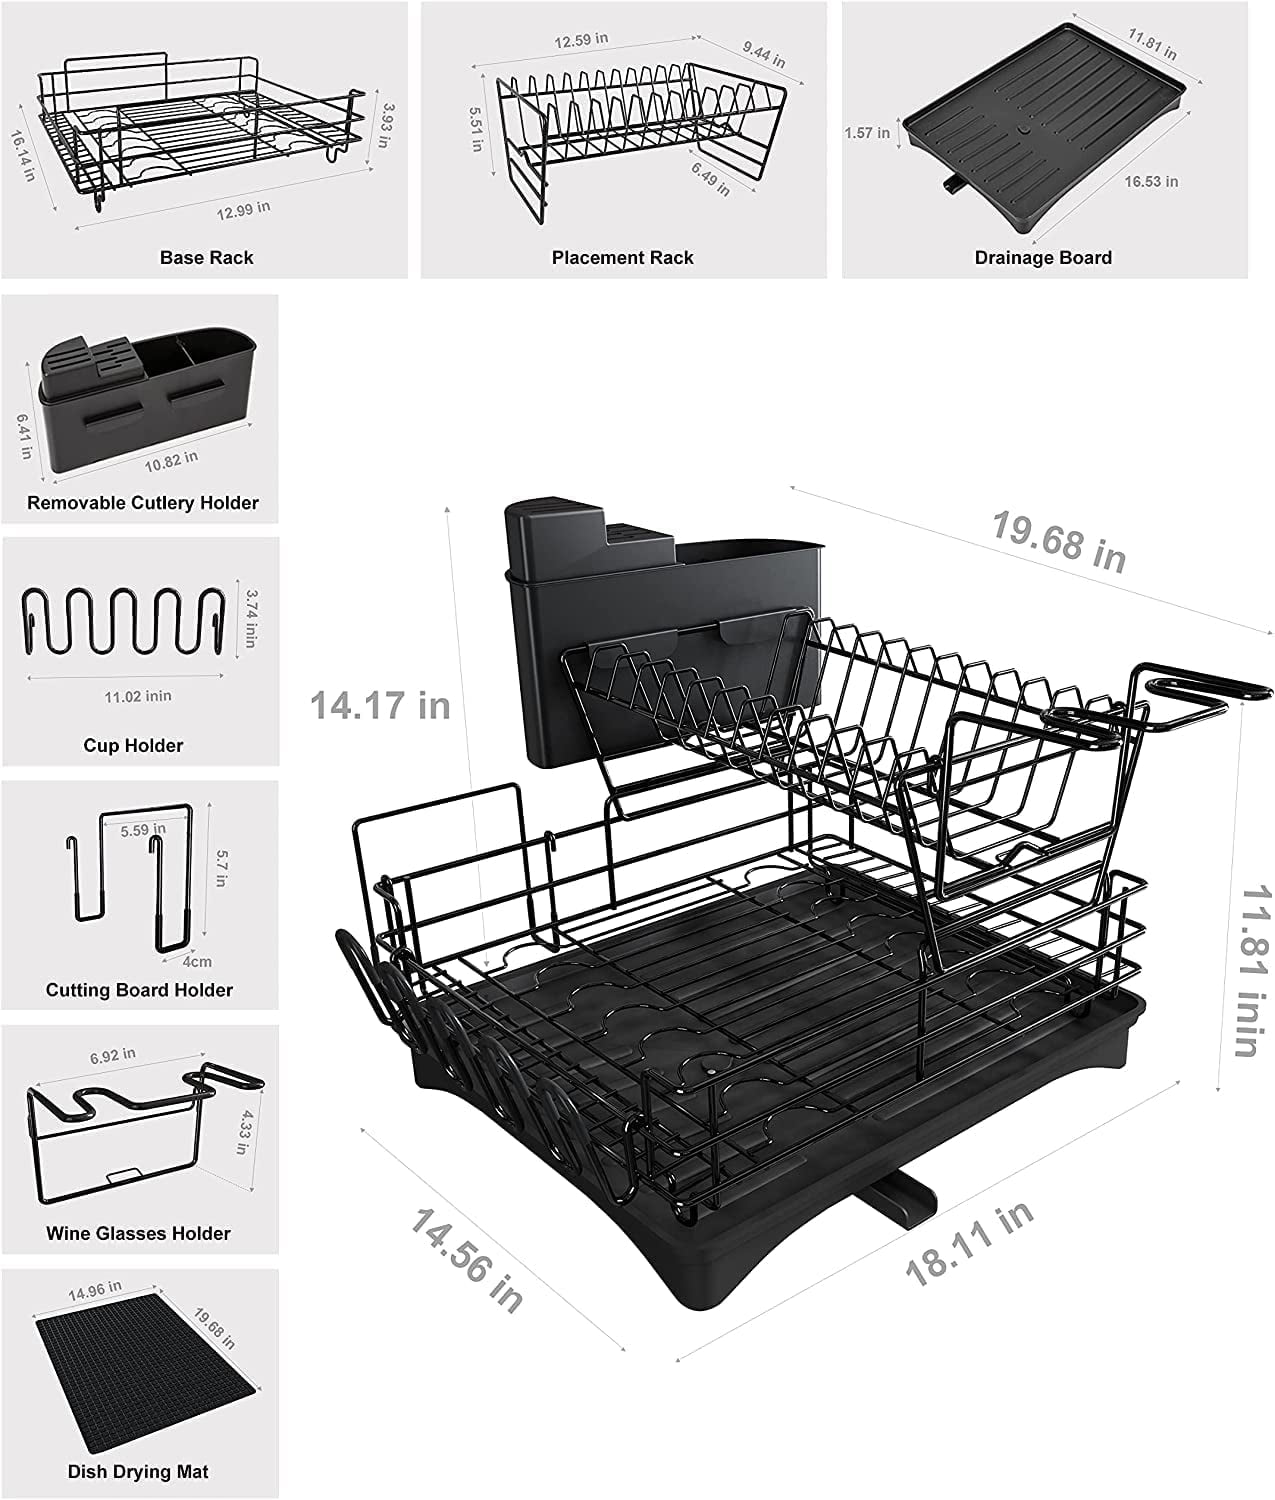  Elerator Dish Drying Racks for Kitchen Counter, Large 2 Tier  Dish Rack with Drainboard, Rust-Proof Metal Dish Drainers with Detachable  Cup Holder, Cutlery Holder, Cutting Board Holder.